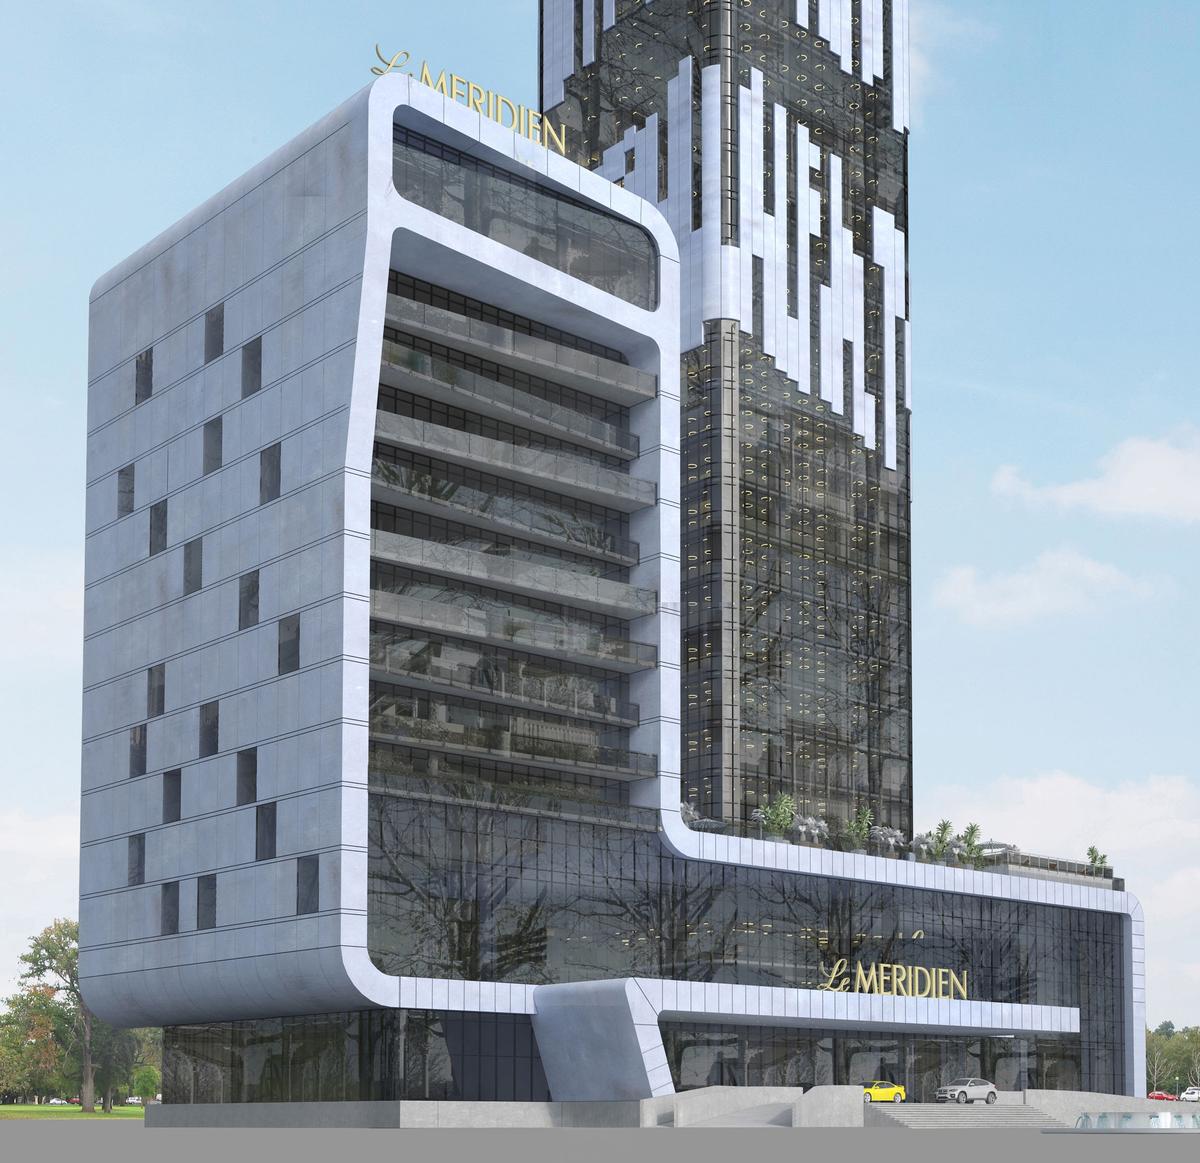 Batumi Tower is a mixed-use development project designed by the Hausart Project / Le Meridien